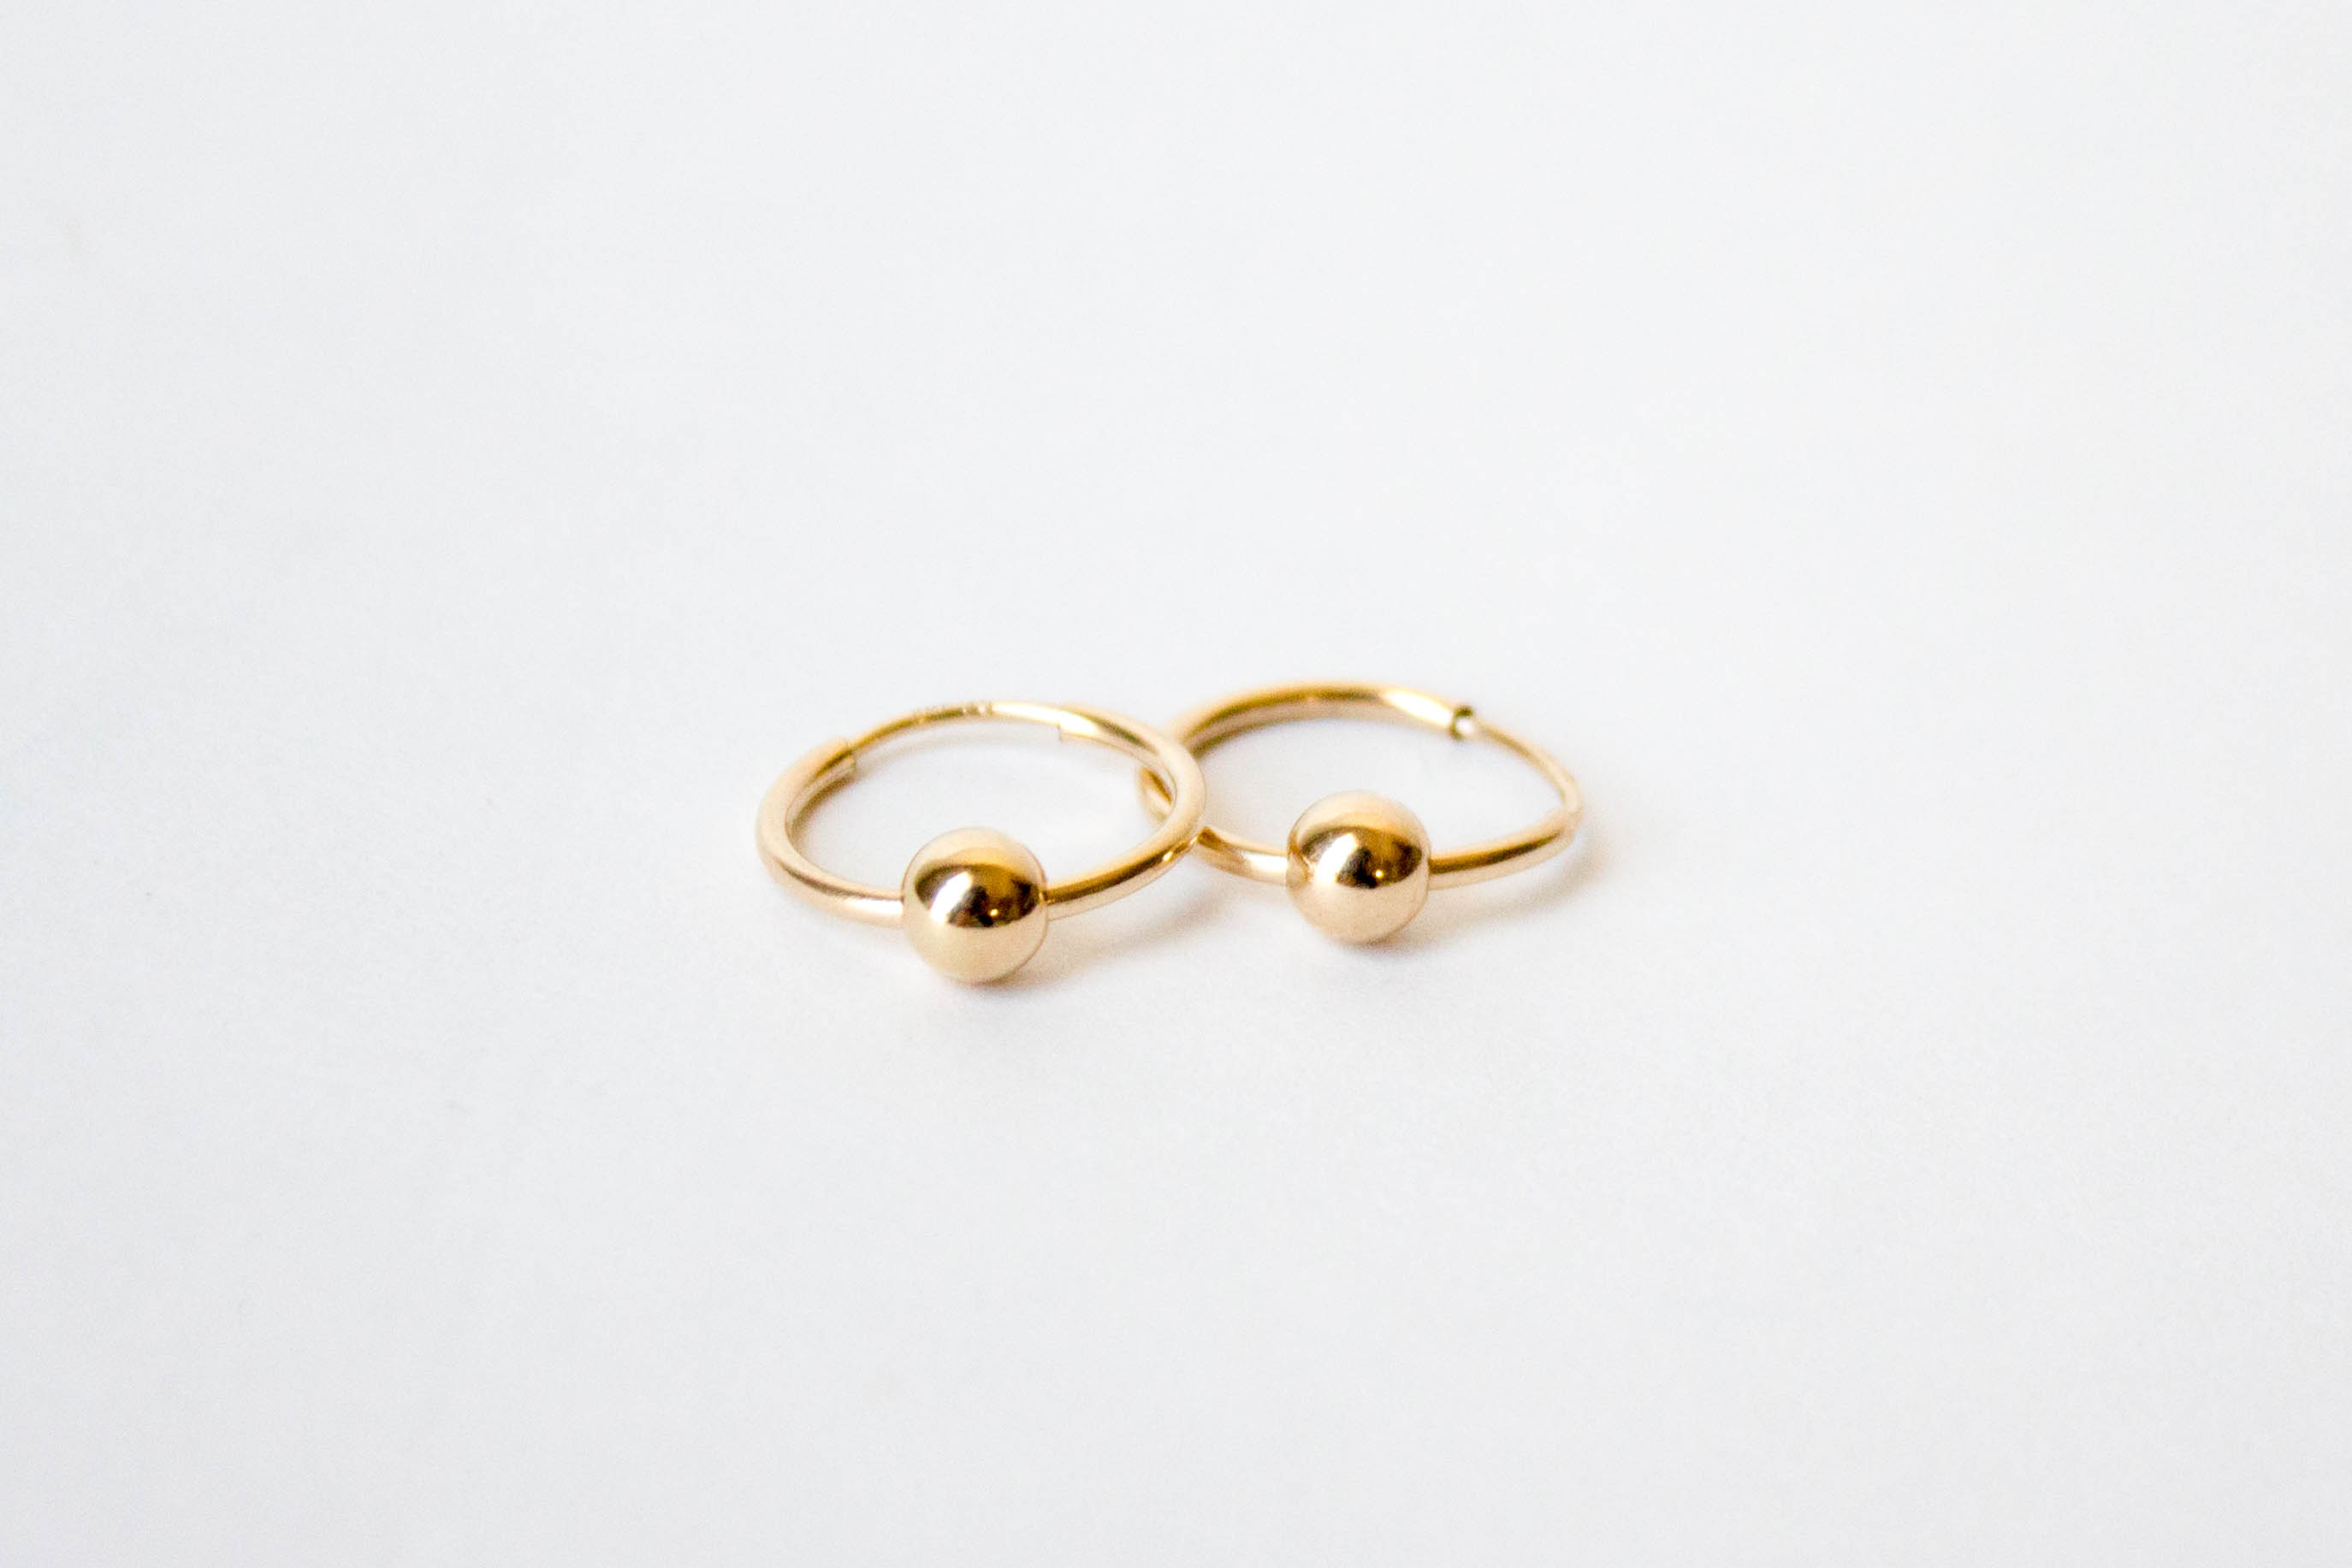 Gold Ring Earrings with Pearls - Soumiez